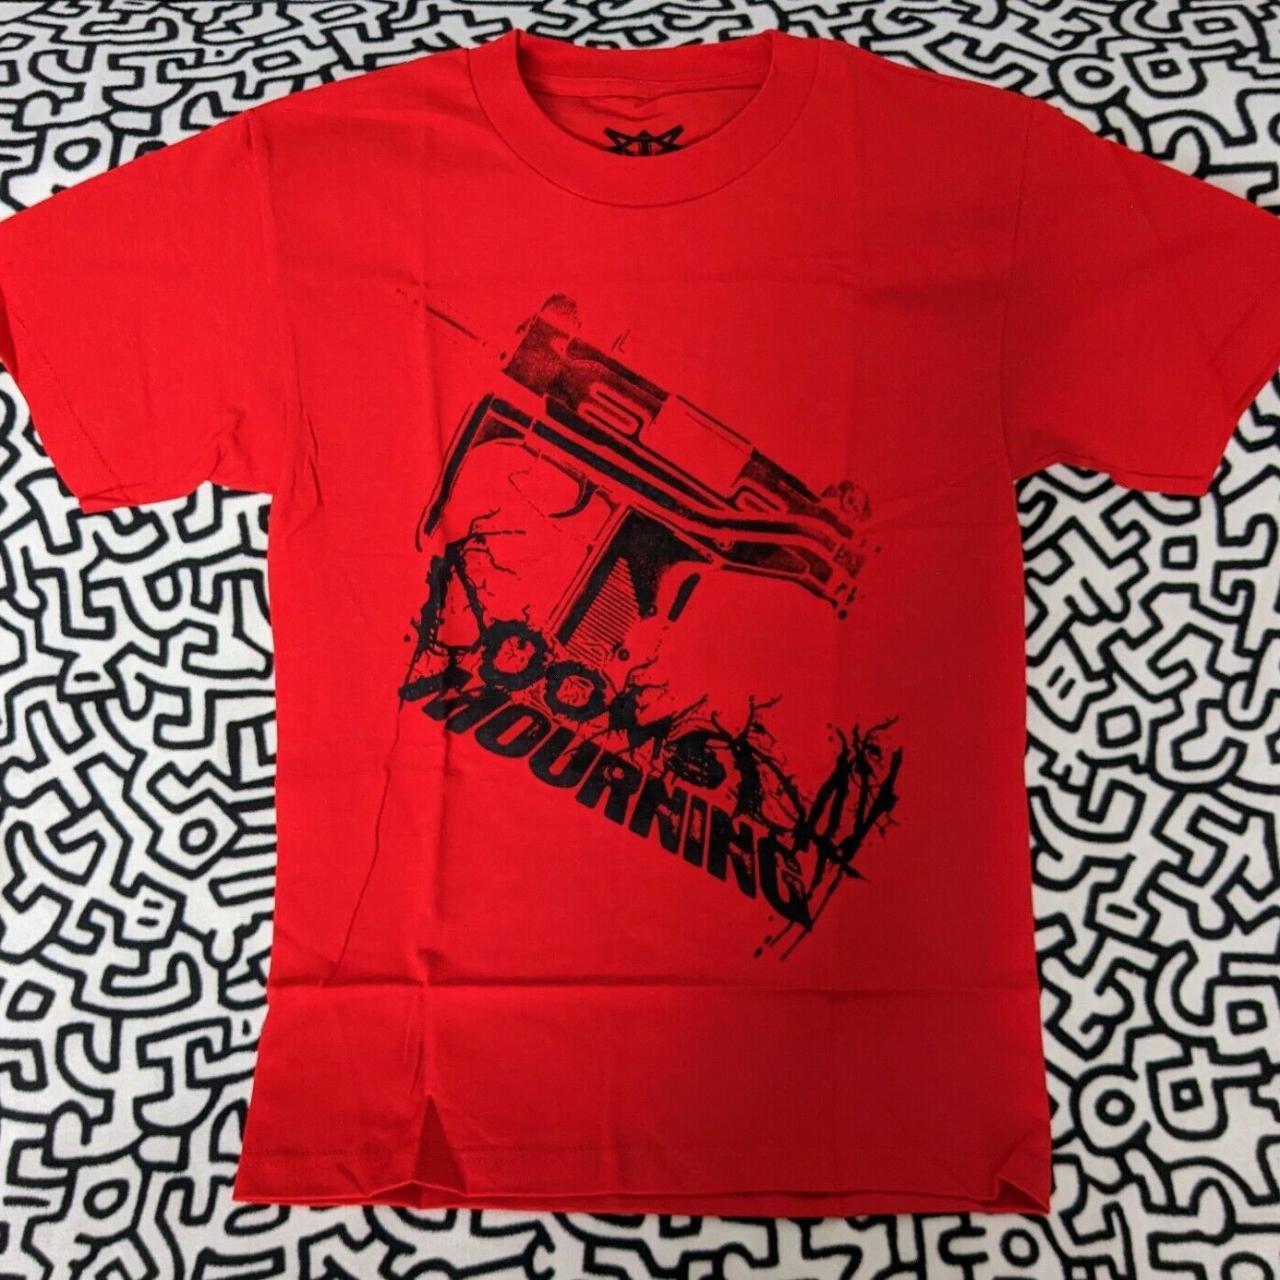 Doomsday Mourning shirt. Red tshirt with Doomsday...